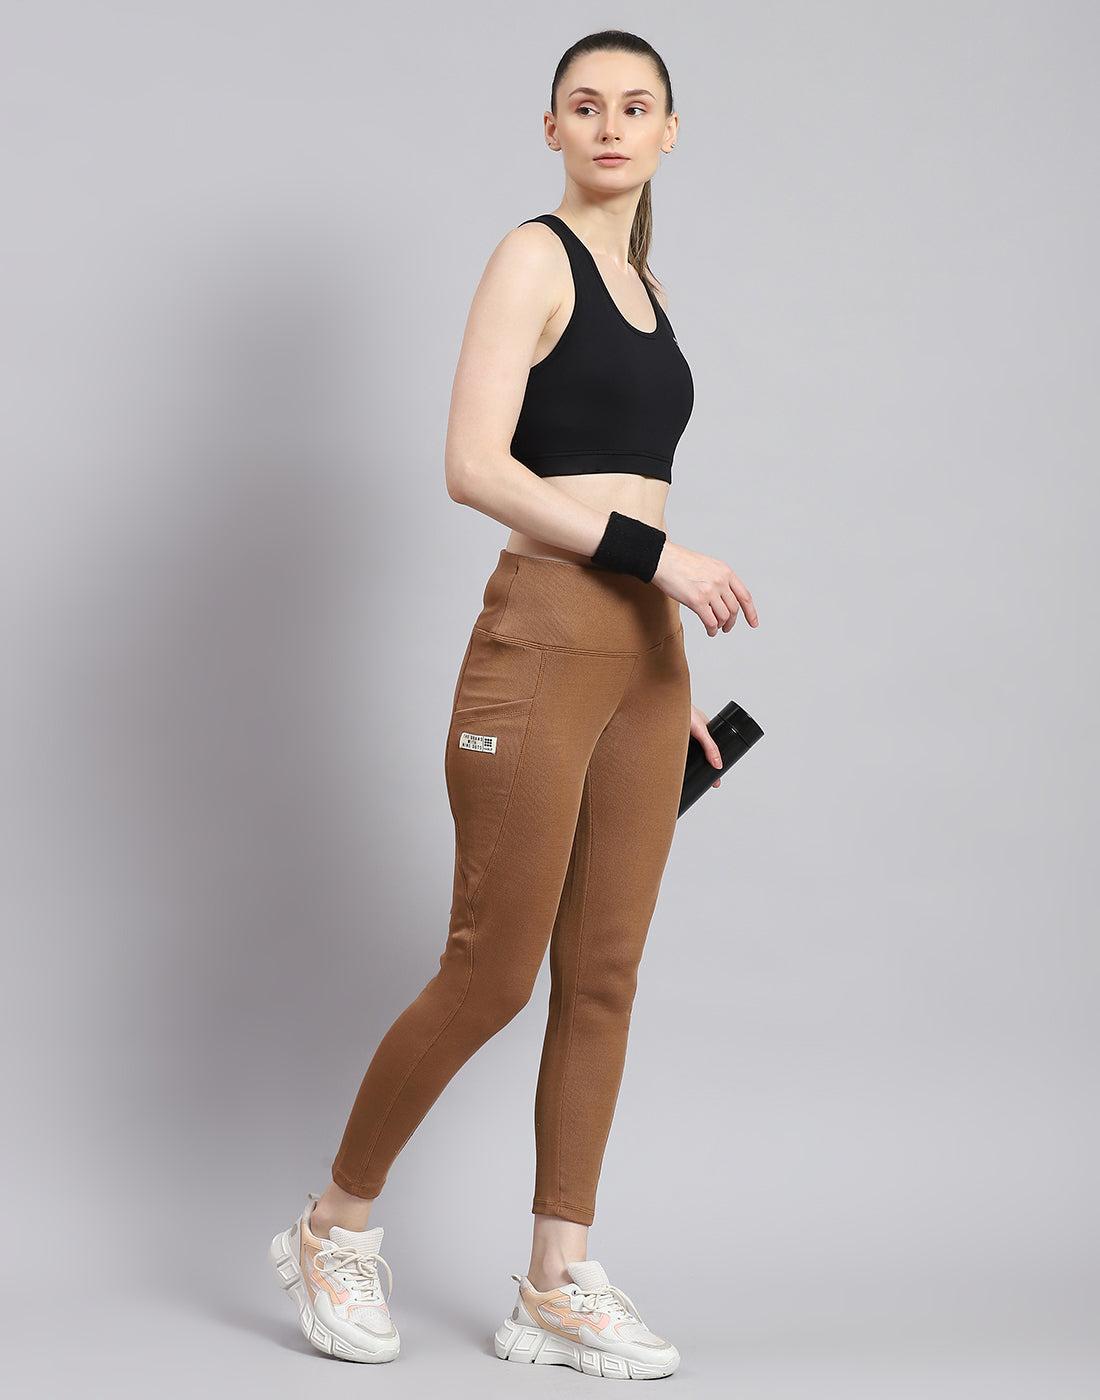 Relaxed Fit Legging Set